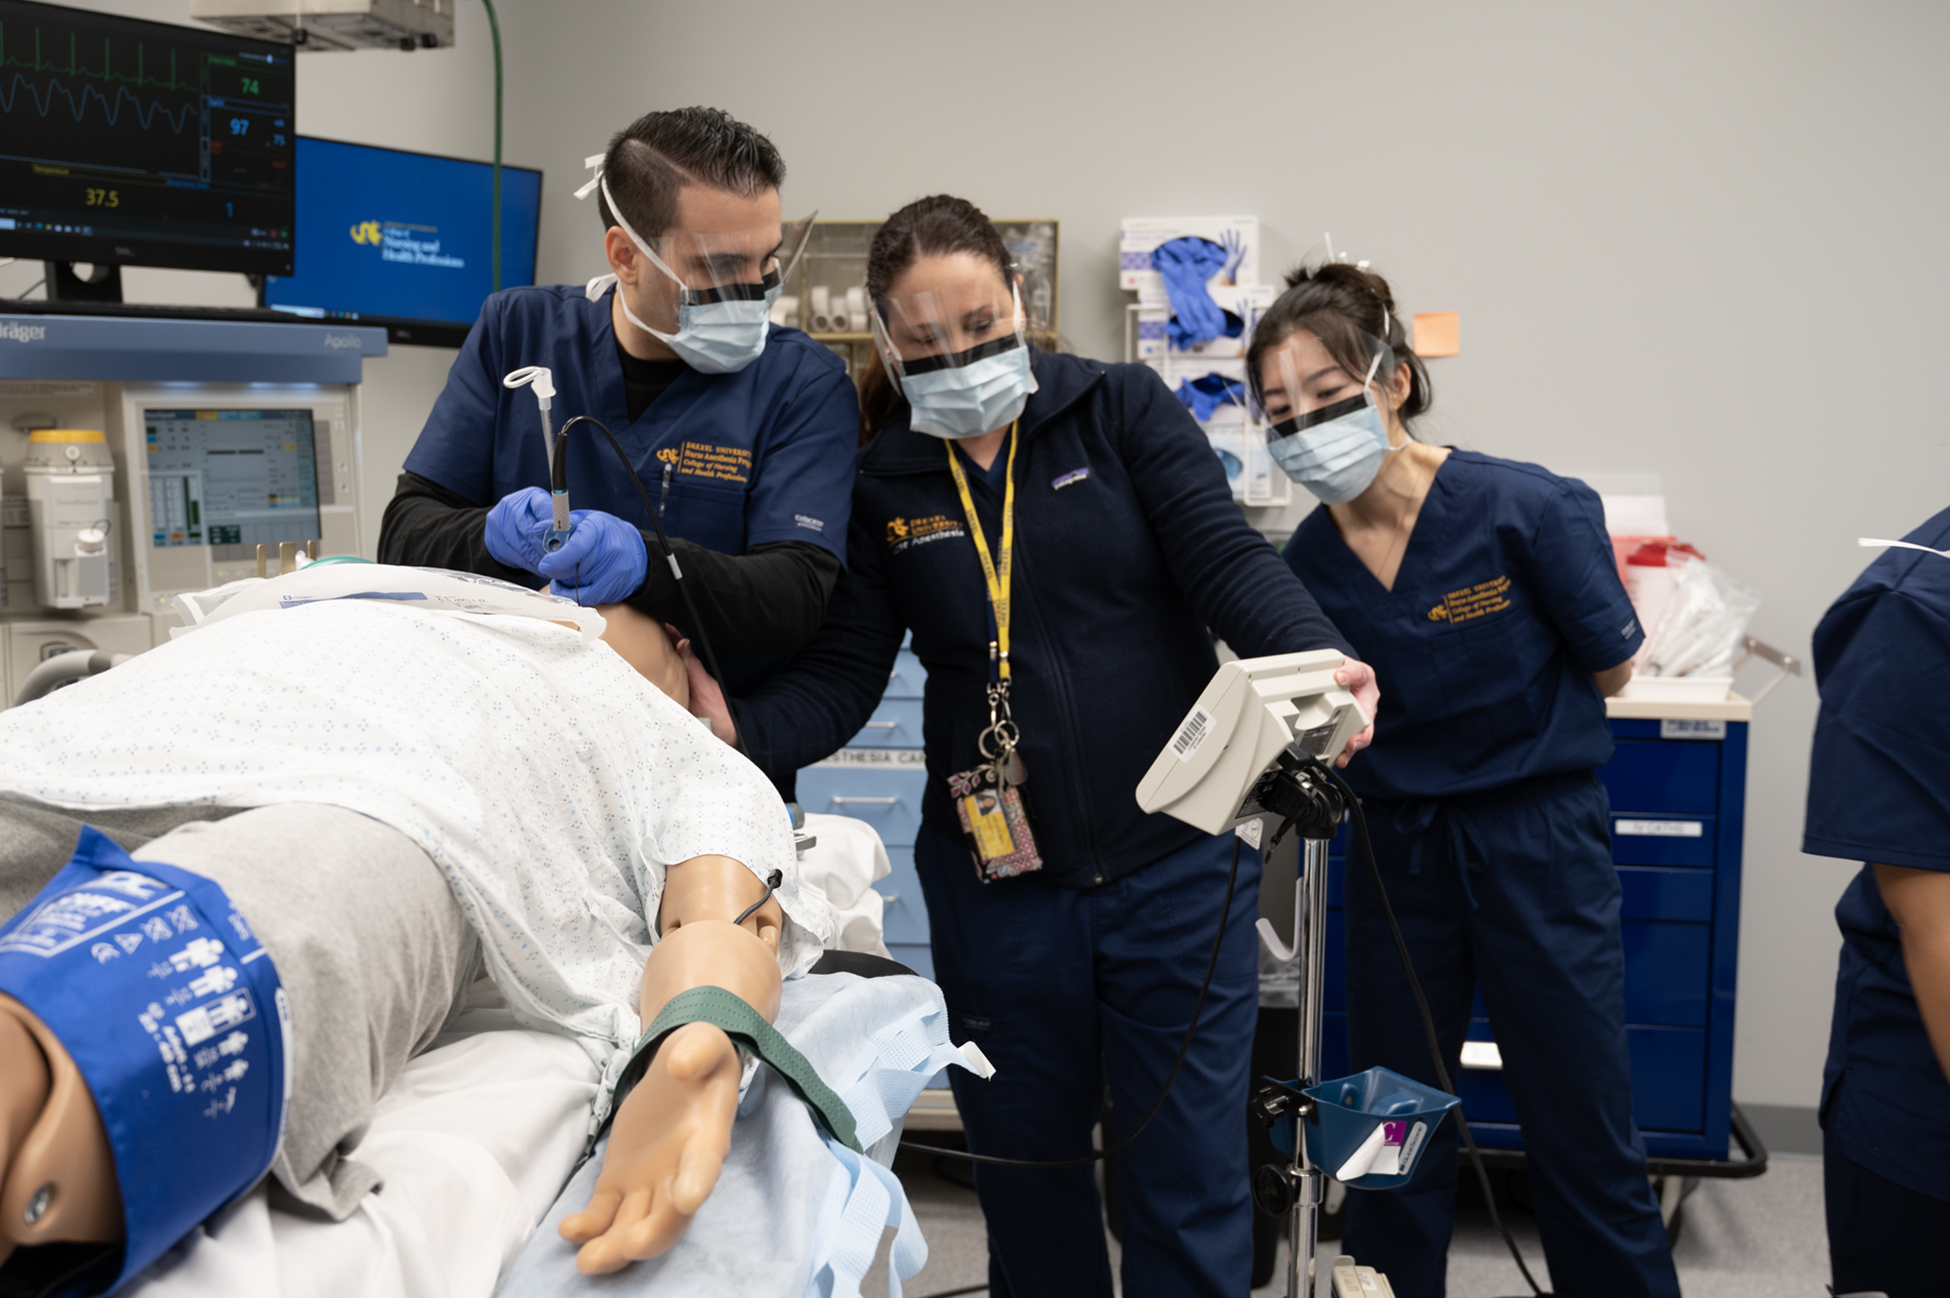 Three health care professionals look at operating room equipment, manikin on operating table